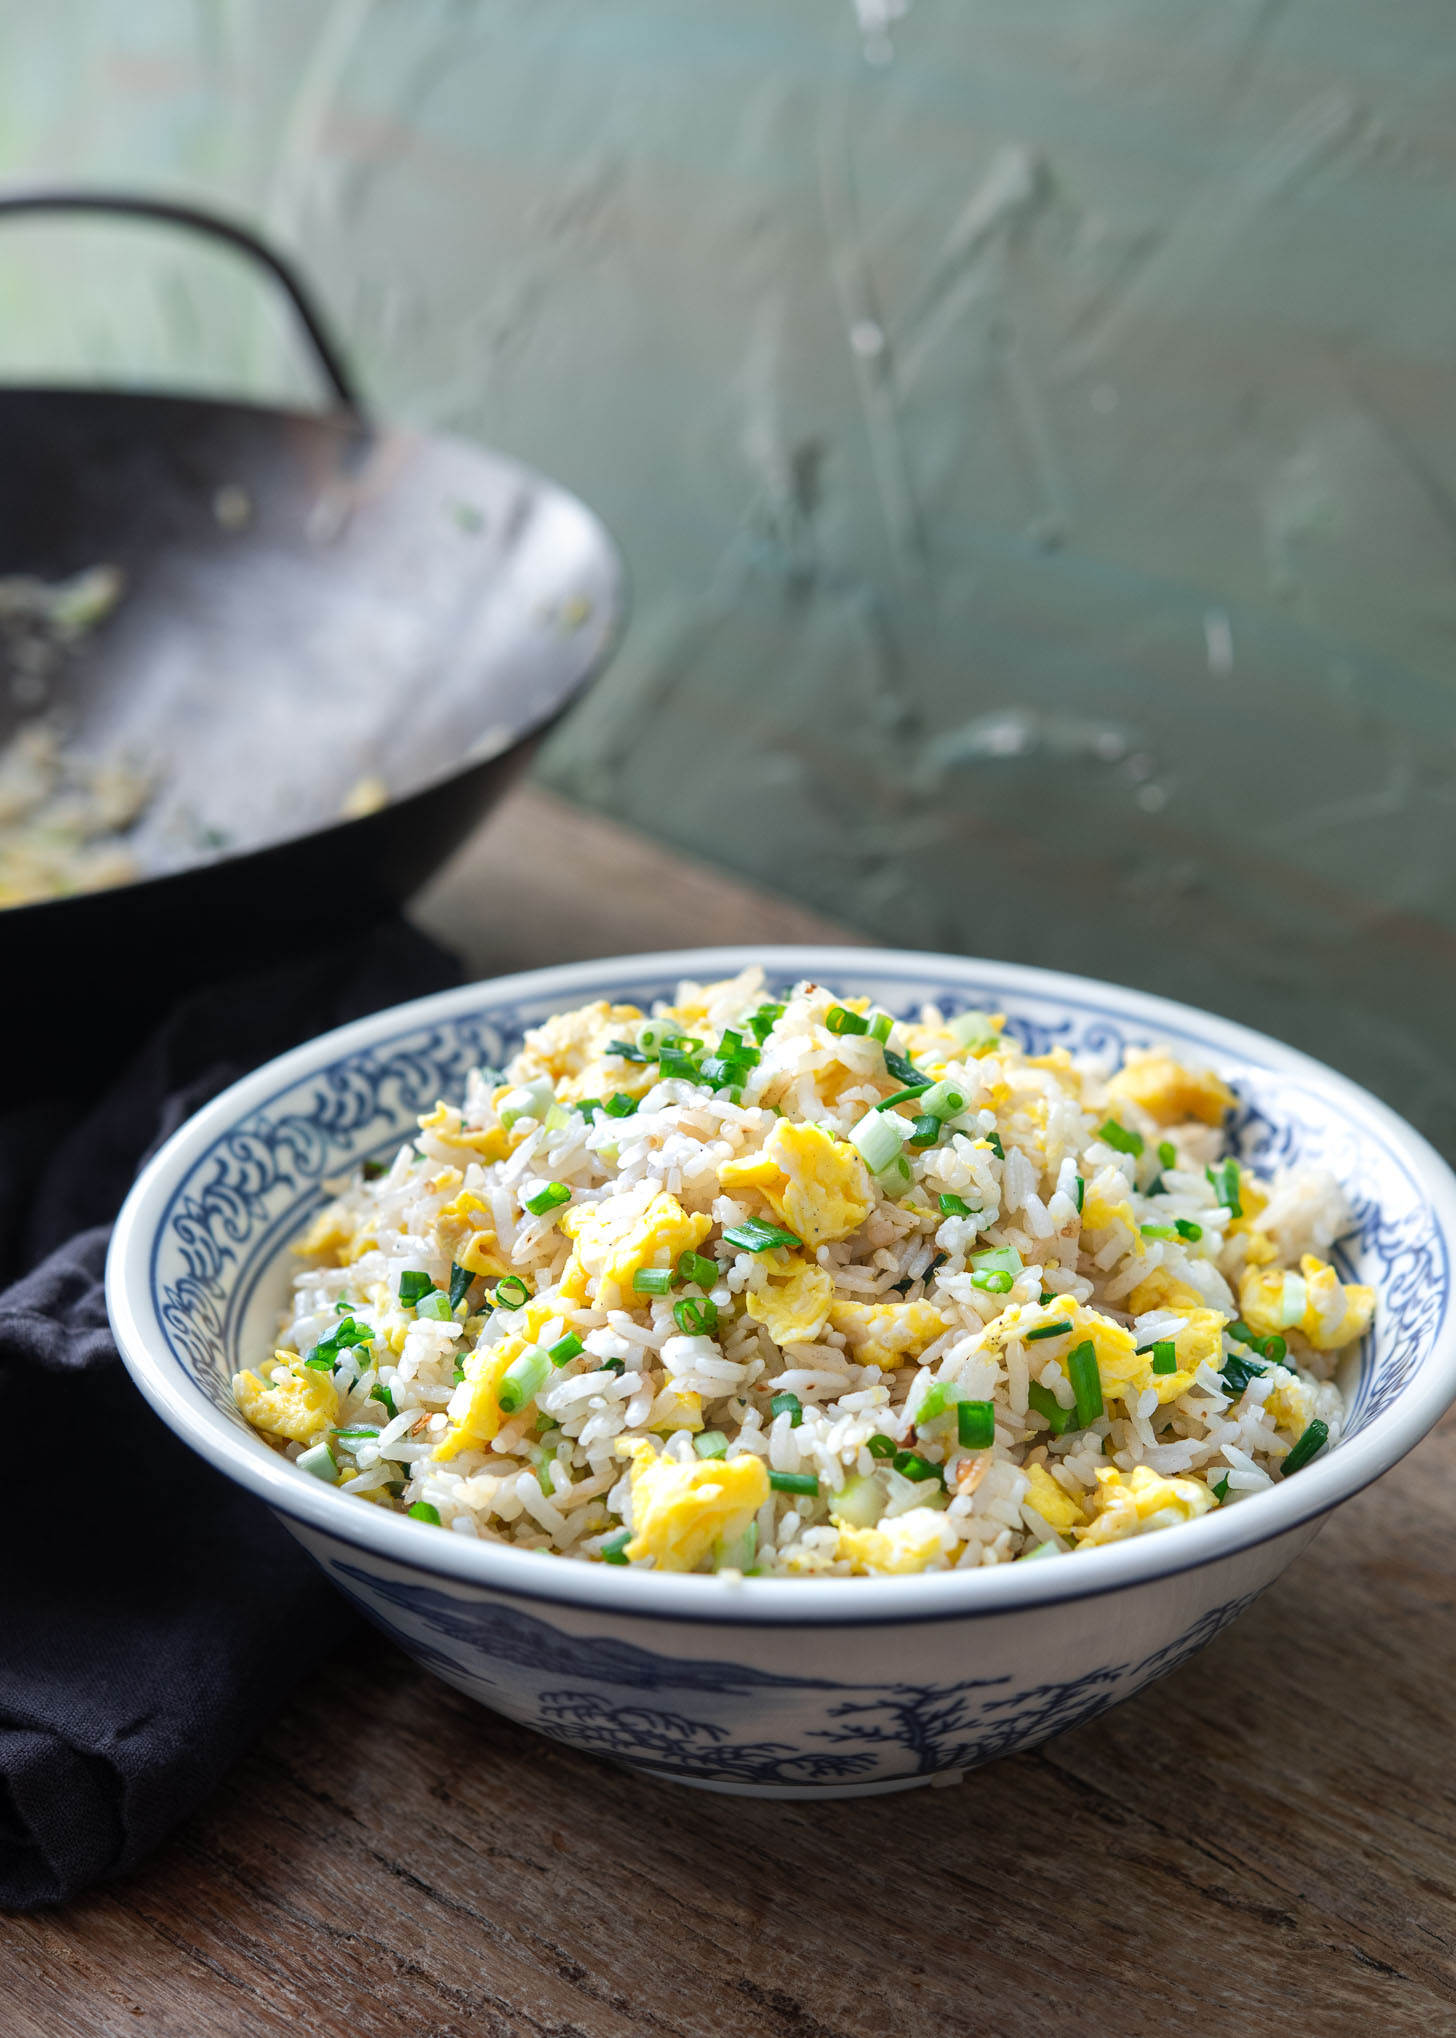 Egg fried rice is plated in a blue and white bowl.